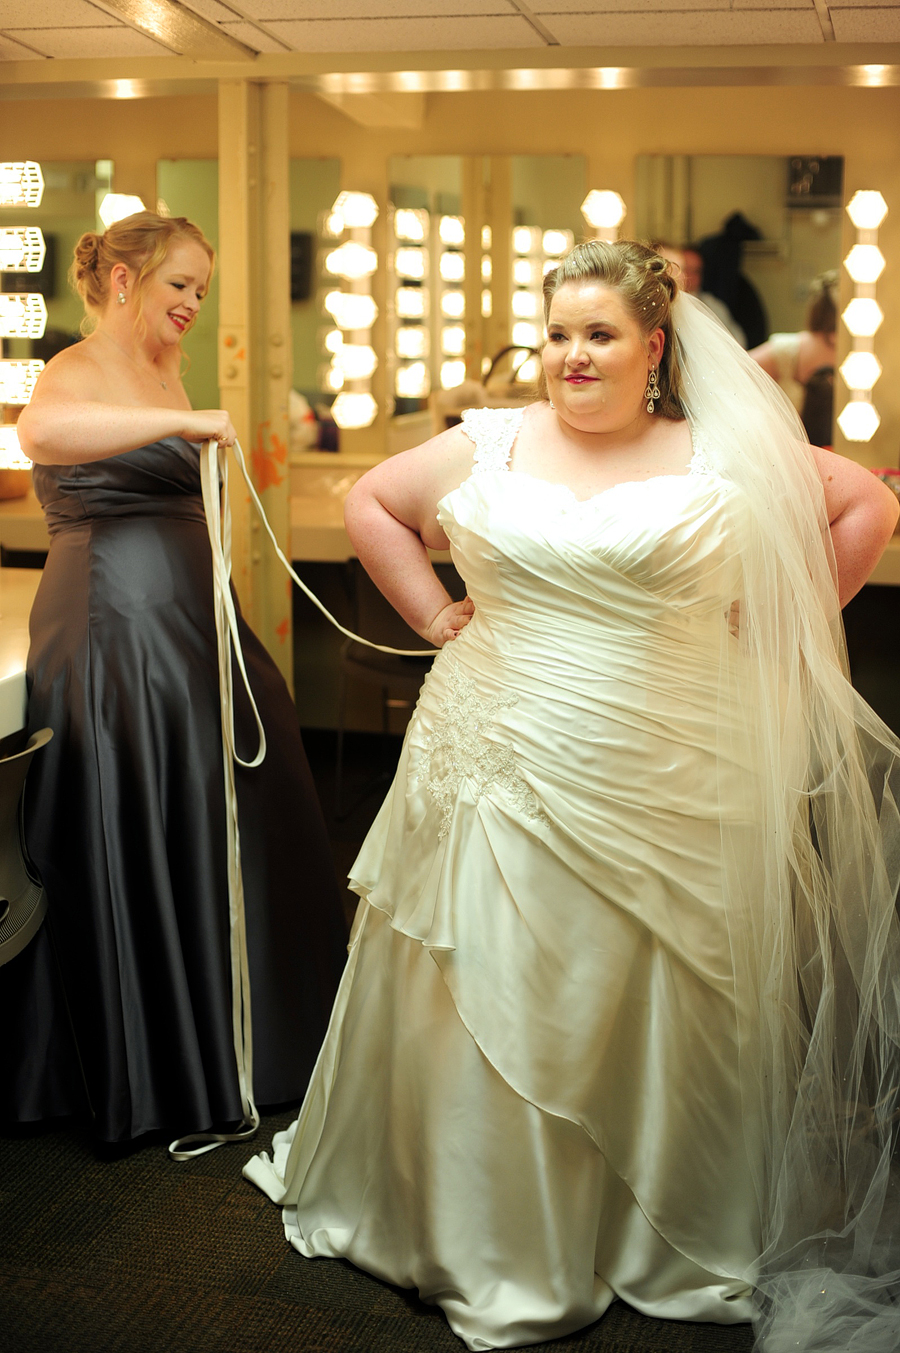 bride getting ready in theater dressing room at santander performing arts center